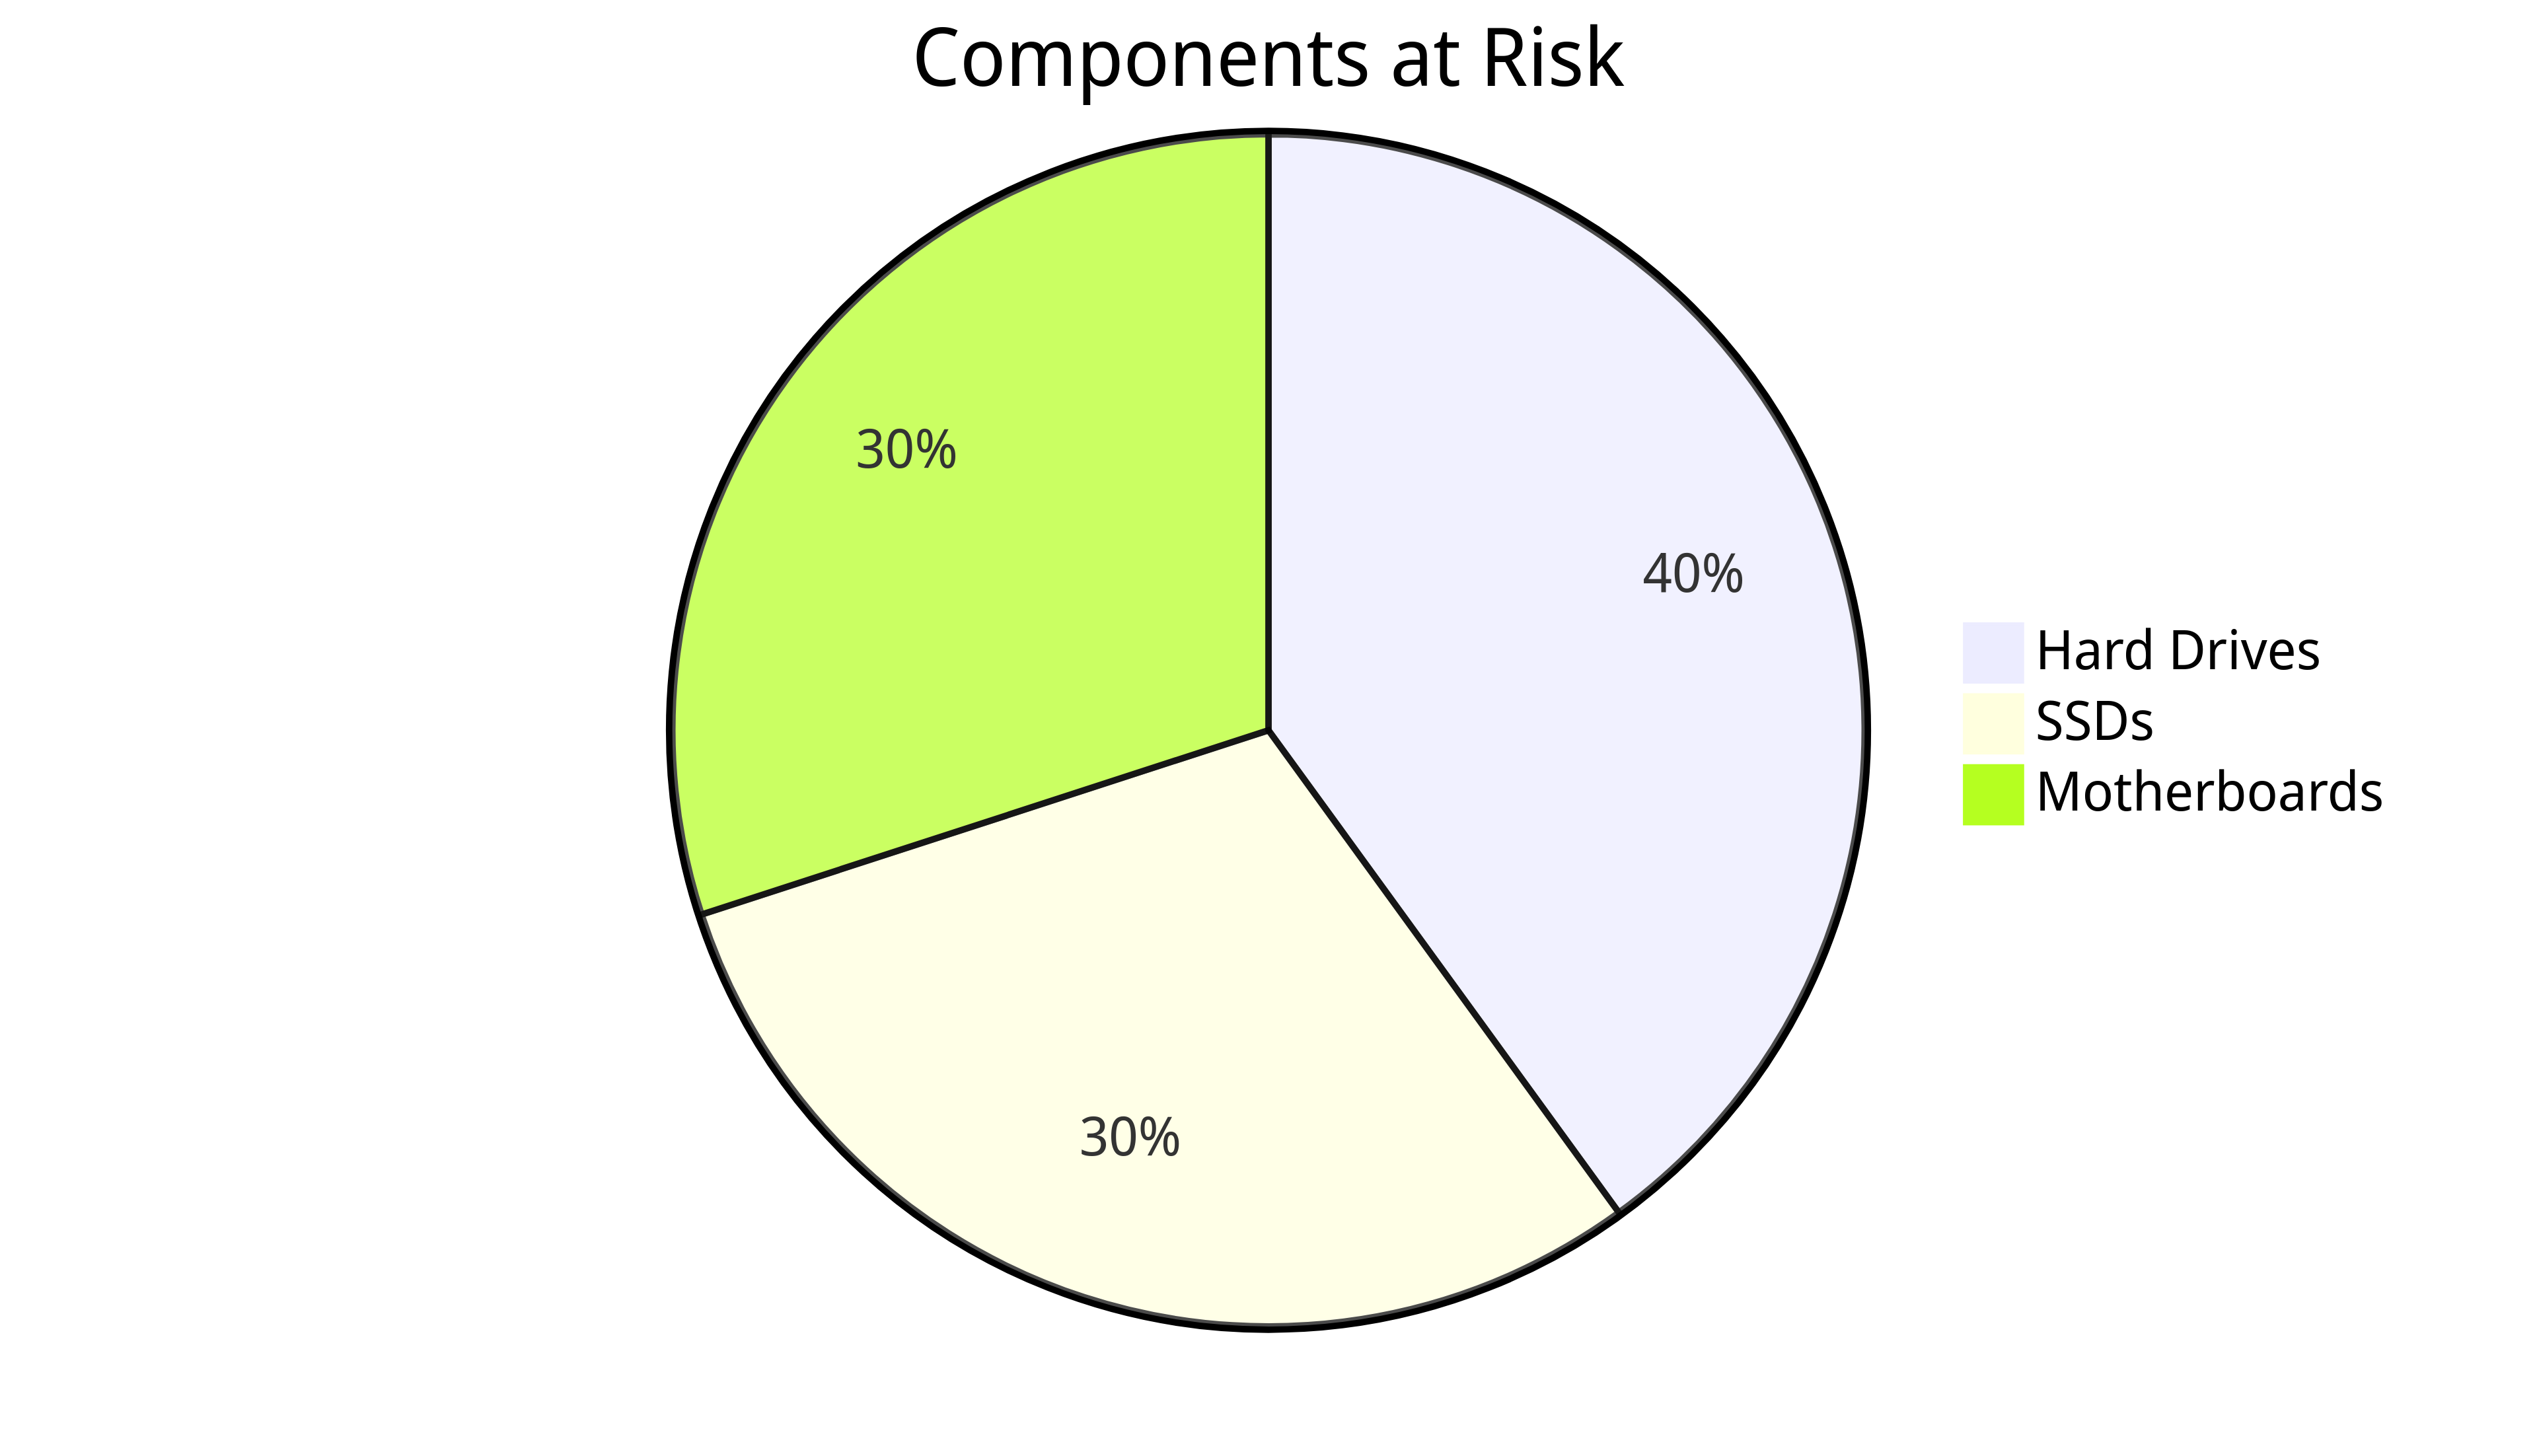 Components at Risk Pie Chart